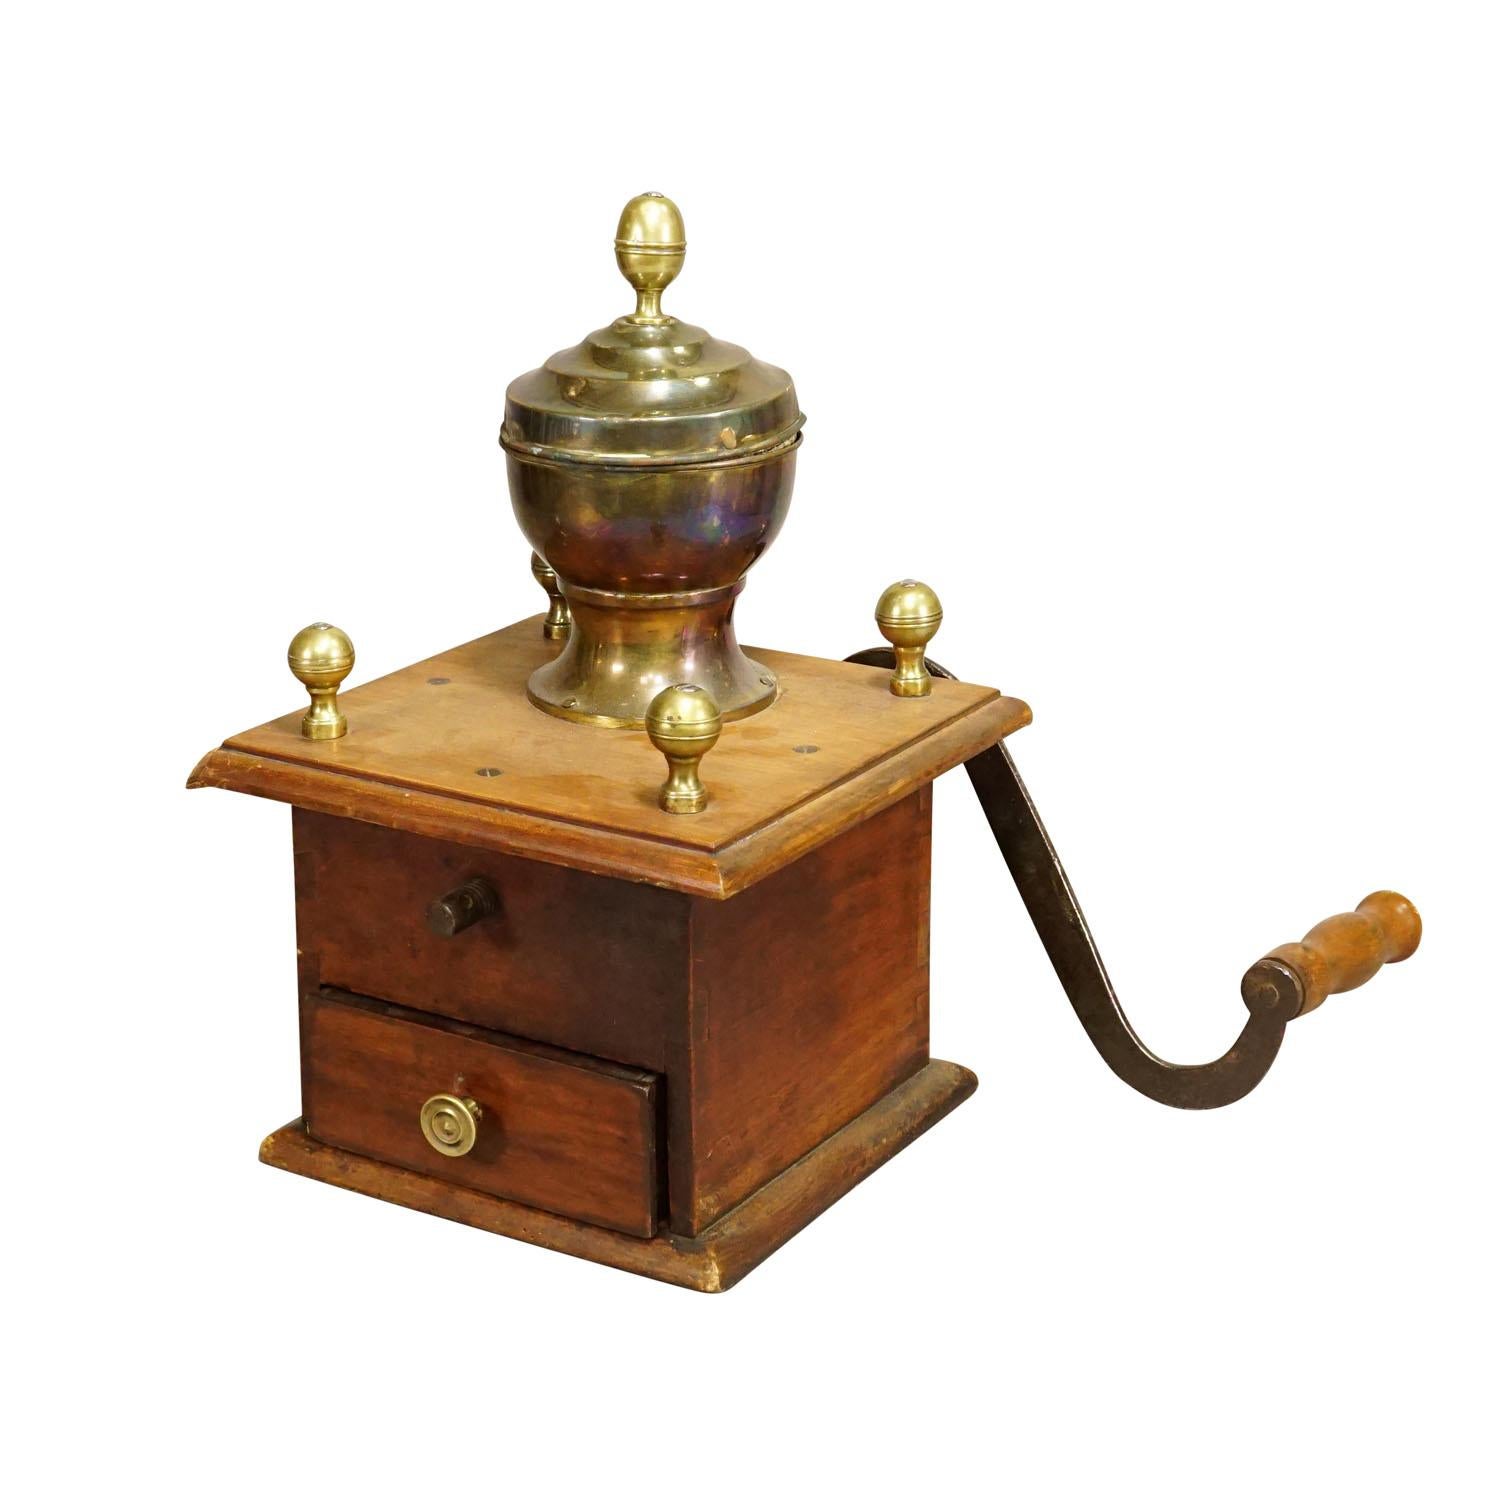 A Large Antique Coffee Grinder, Germany circa 1900s

A large antique coffee grinder manufactured in Germany around 1900. Made with nutwood, iron crank and brass container for coffee beans. Very good condition, working order.

Measures:
Width: 10.63